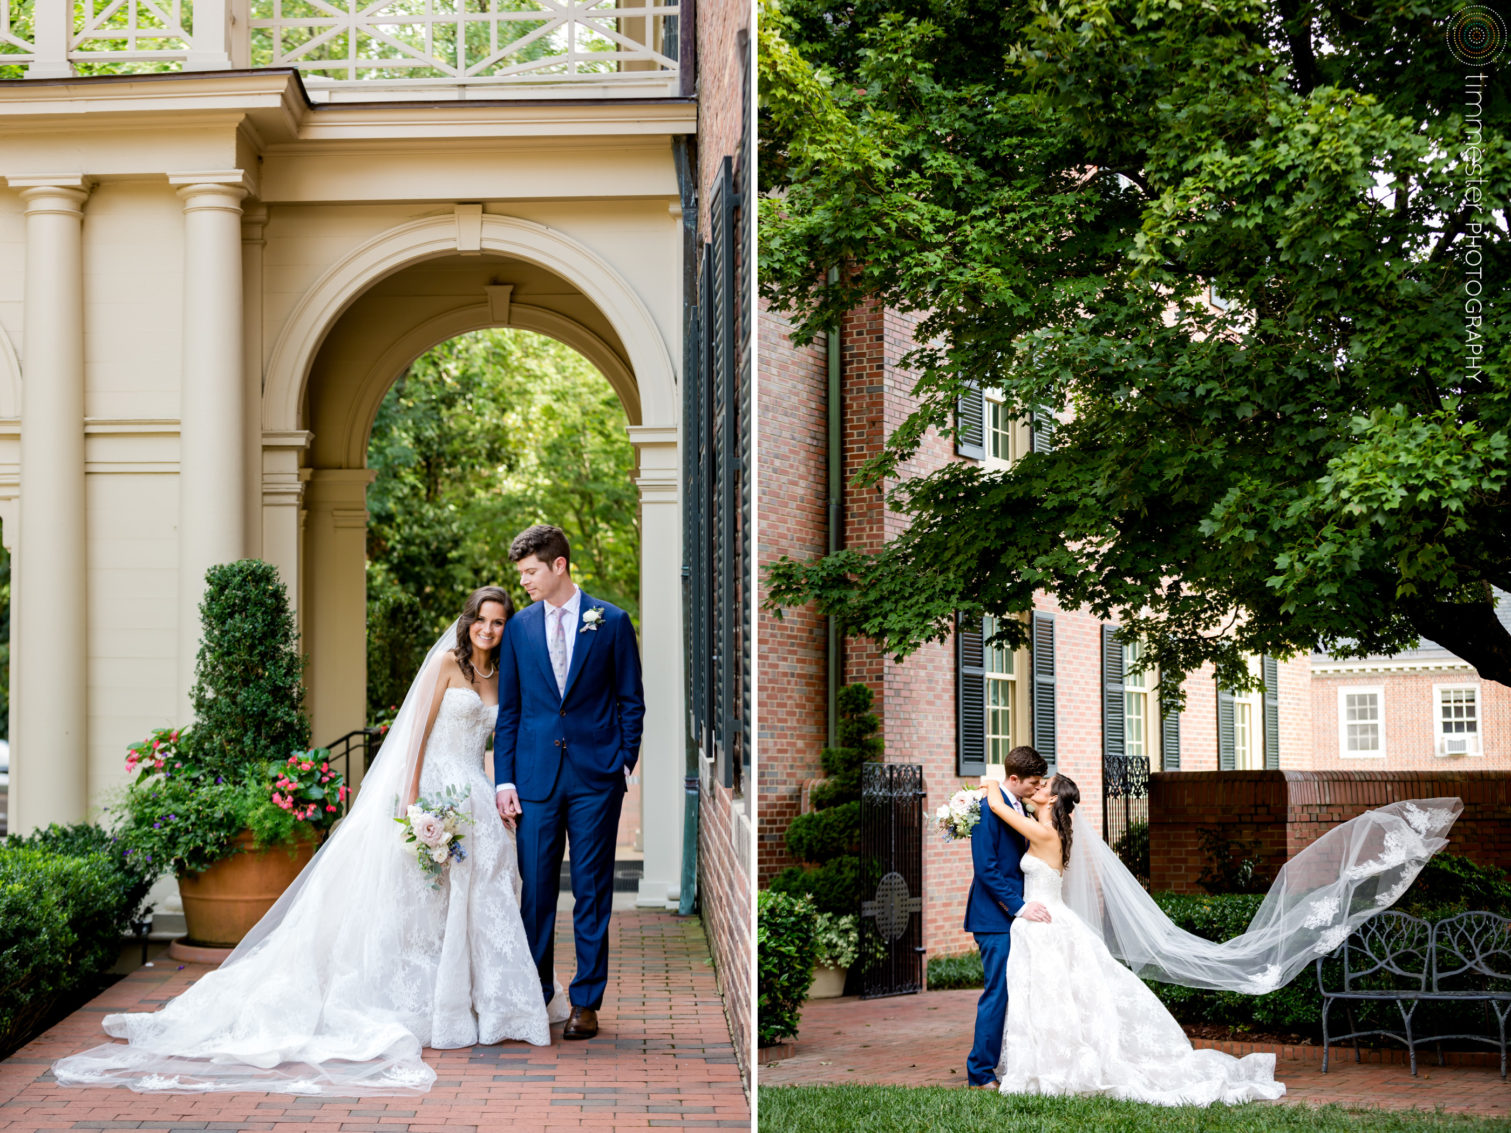 A wedding day and bride and groom portraits at The Carolina Inn in Chapel Hill.